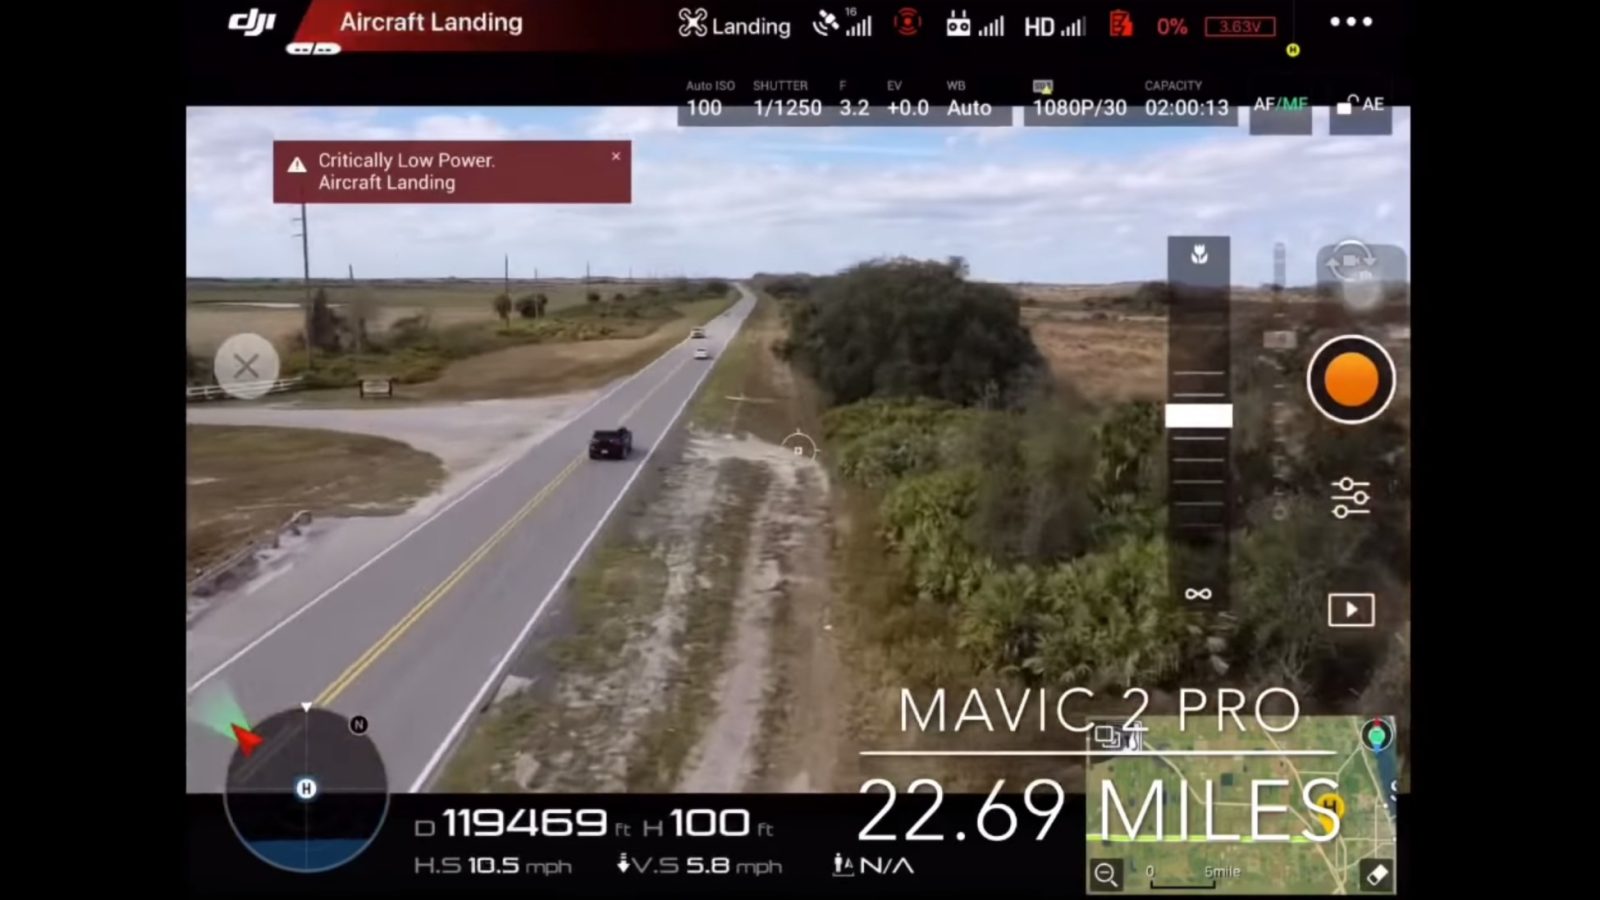 Man flies Mavic 2 Pro for more than 22 miles over a busy road in Florida